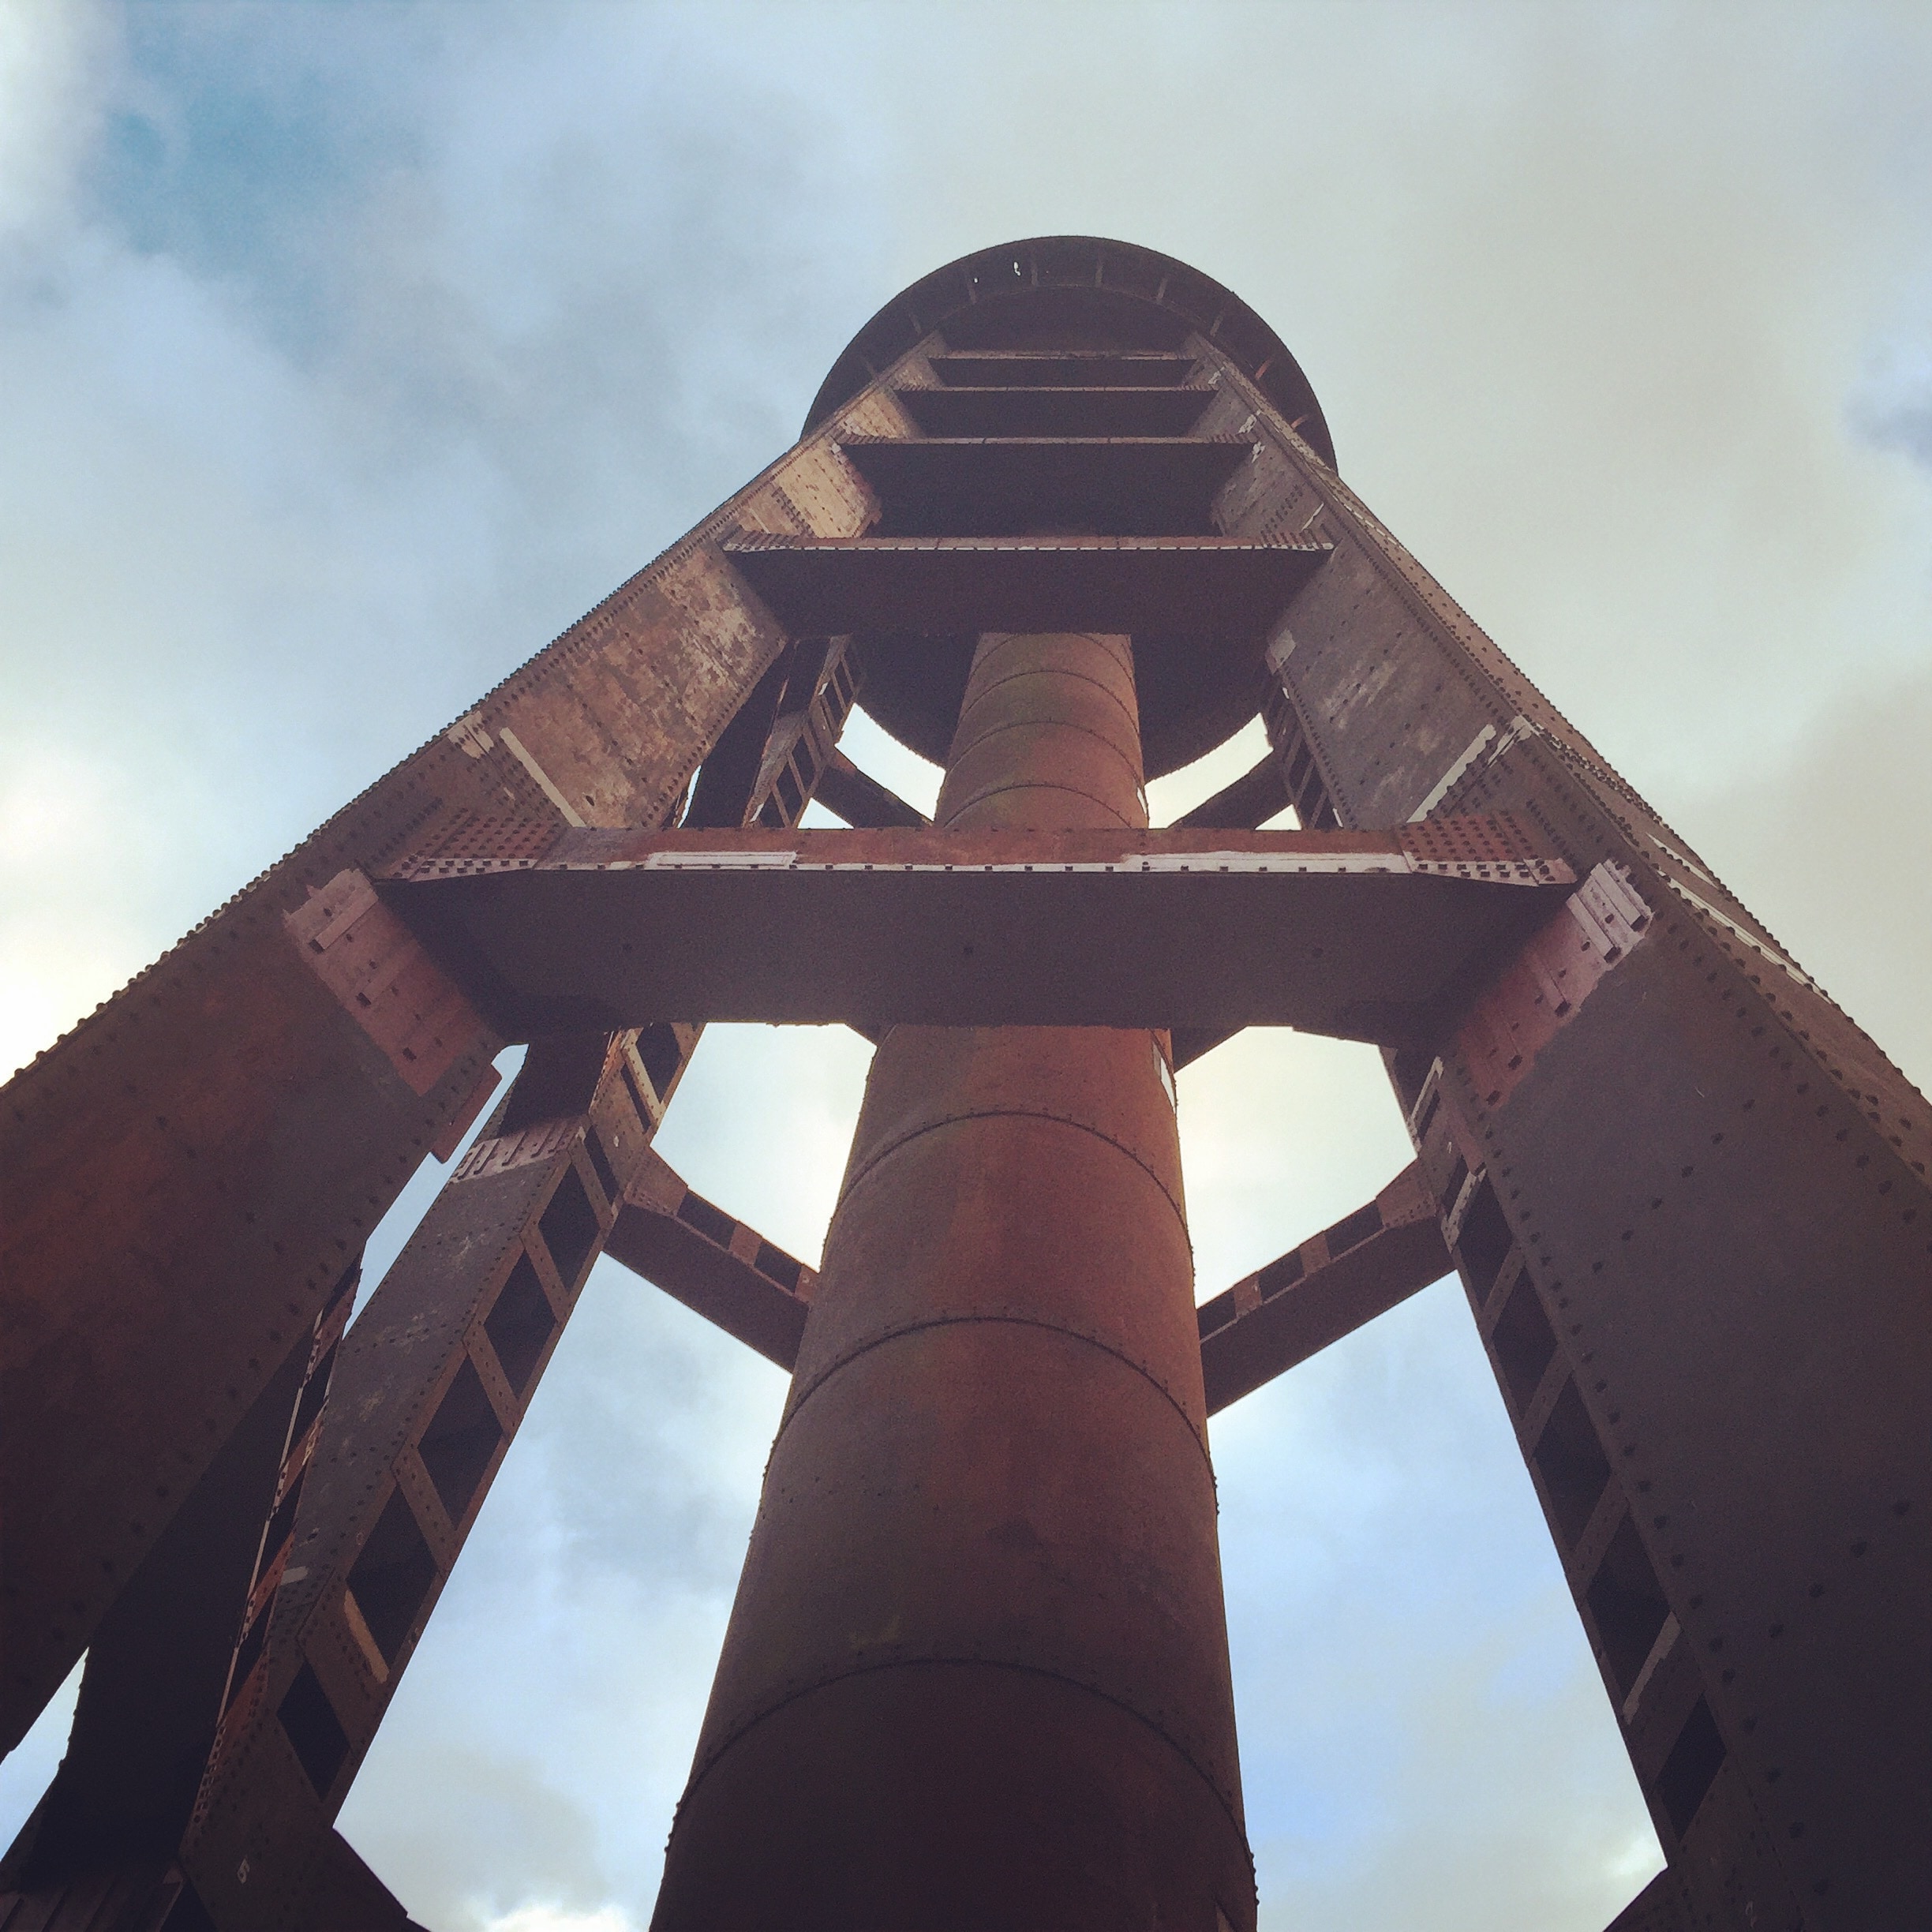 under-view photo of metal tower under nimbus clouds